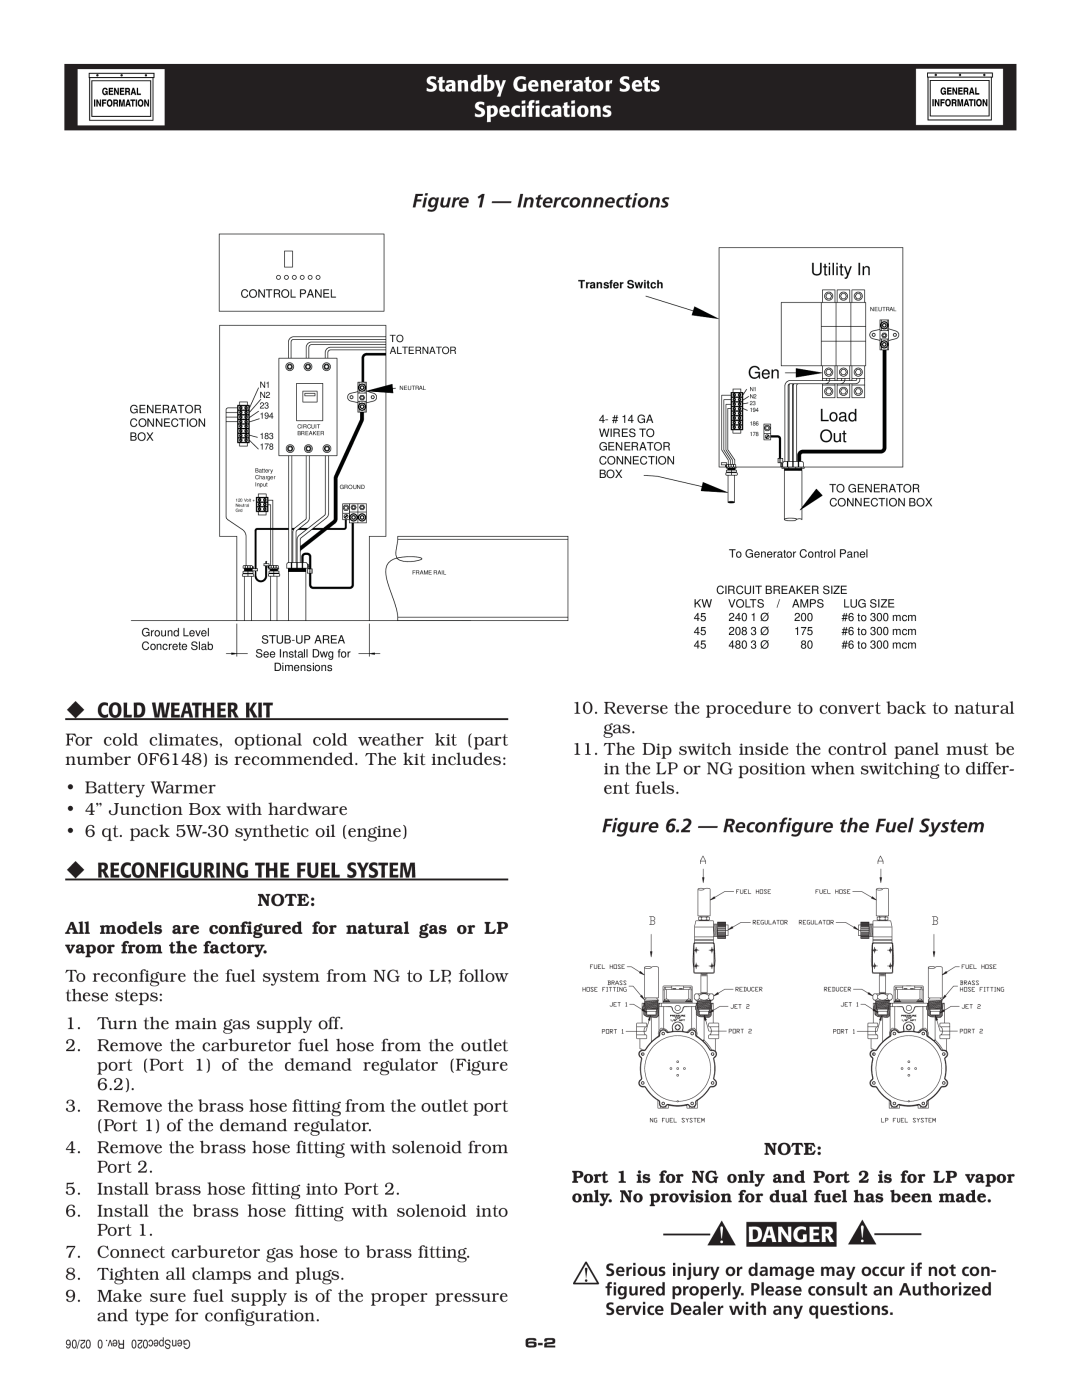 Generac Power Systems 005261-1, 005262-1 ‹ Cold Weather Kit, ‹ Reconfiguring The Fuel System, Danger, Interconnections 